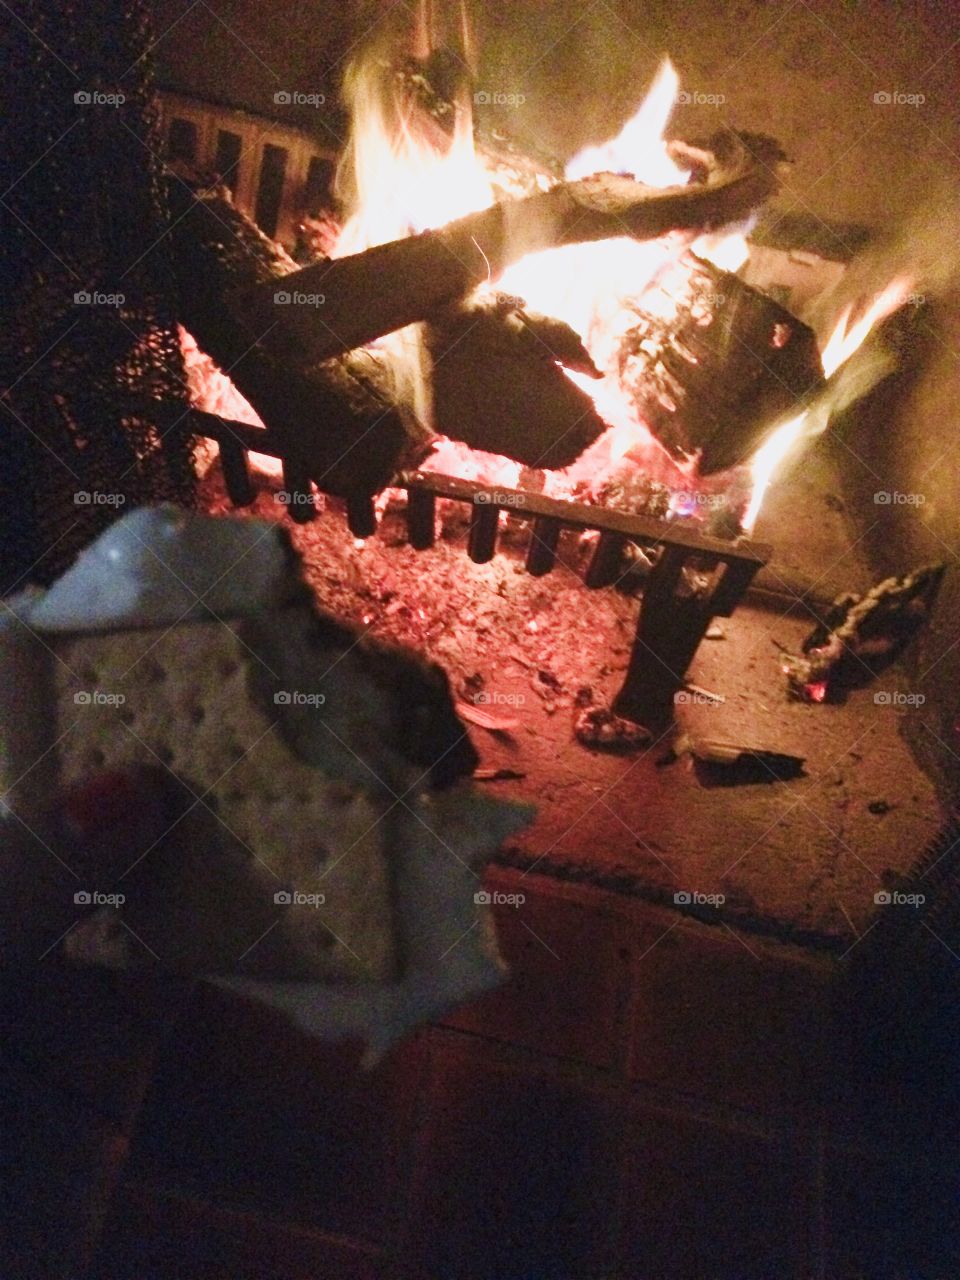 S’mores Indoors!